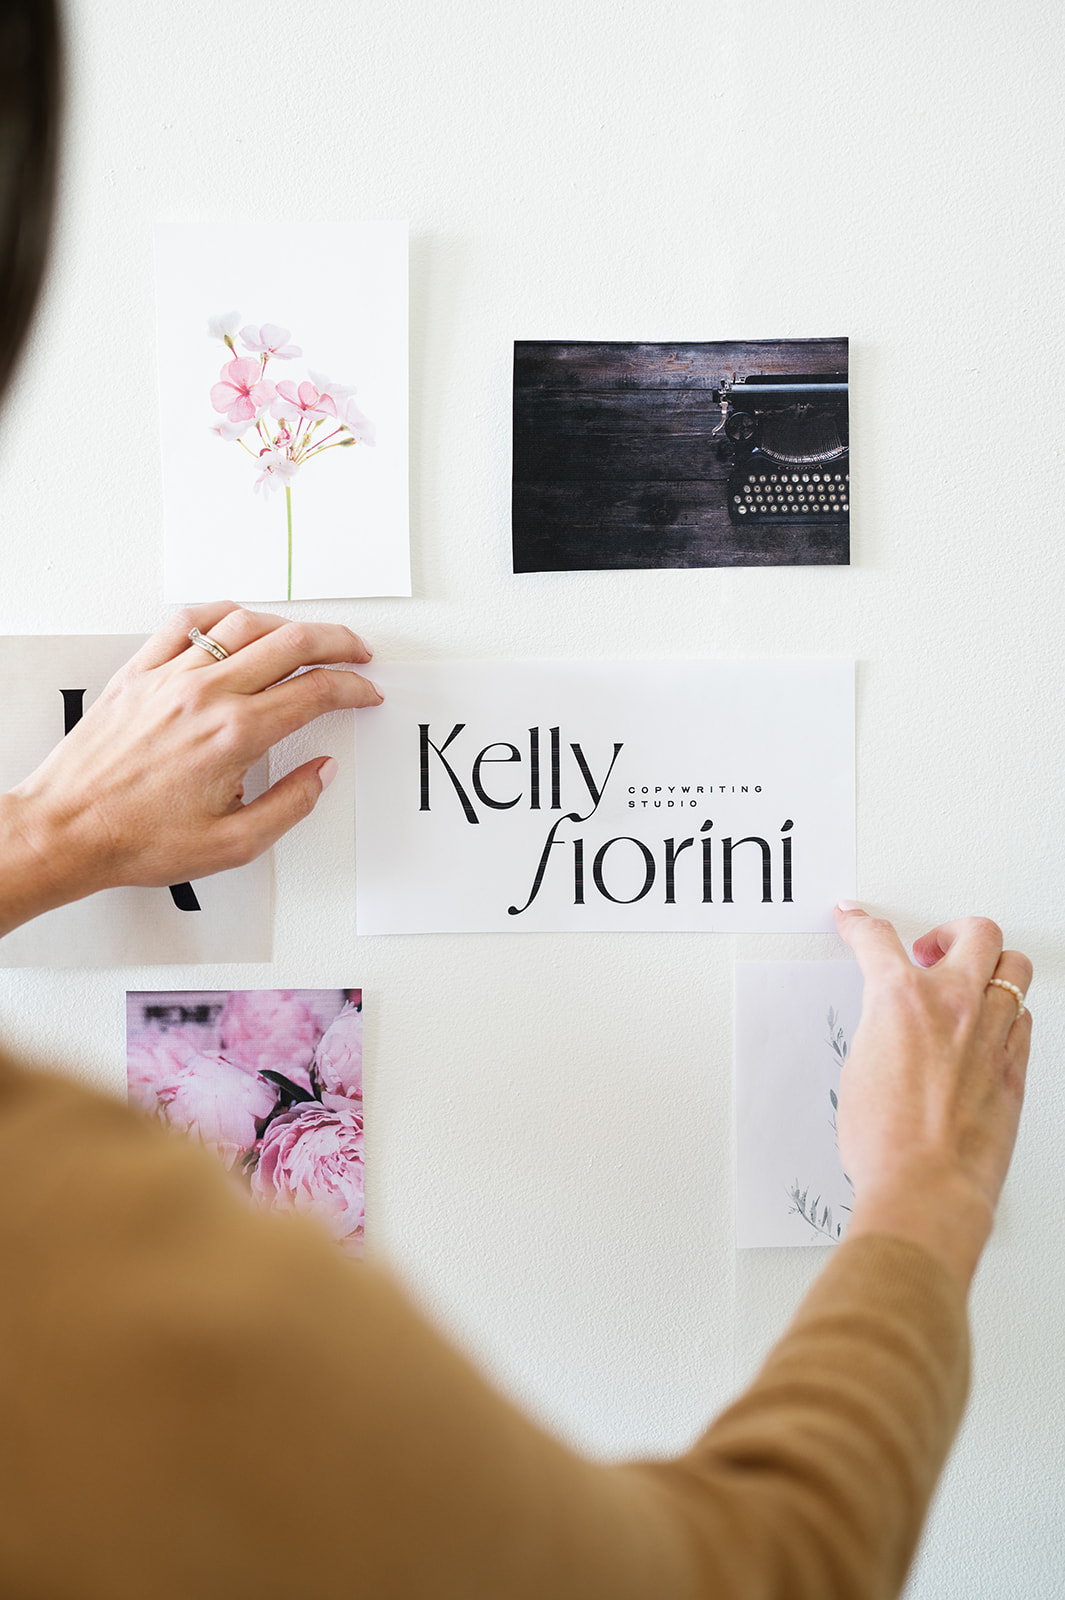 Kelly Fiorini puts brand photos on the wall